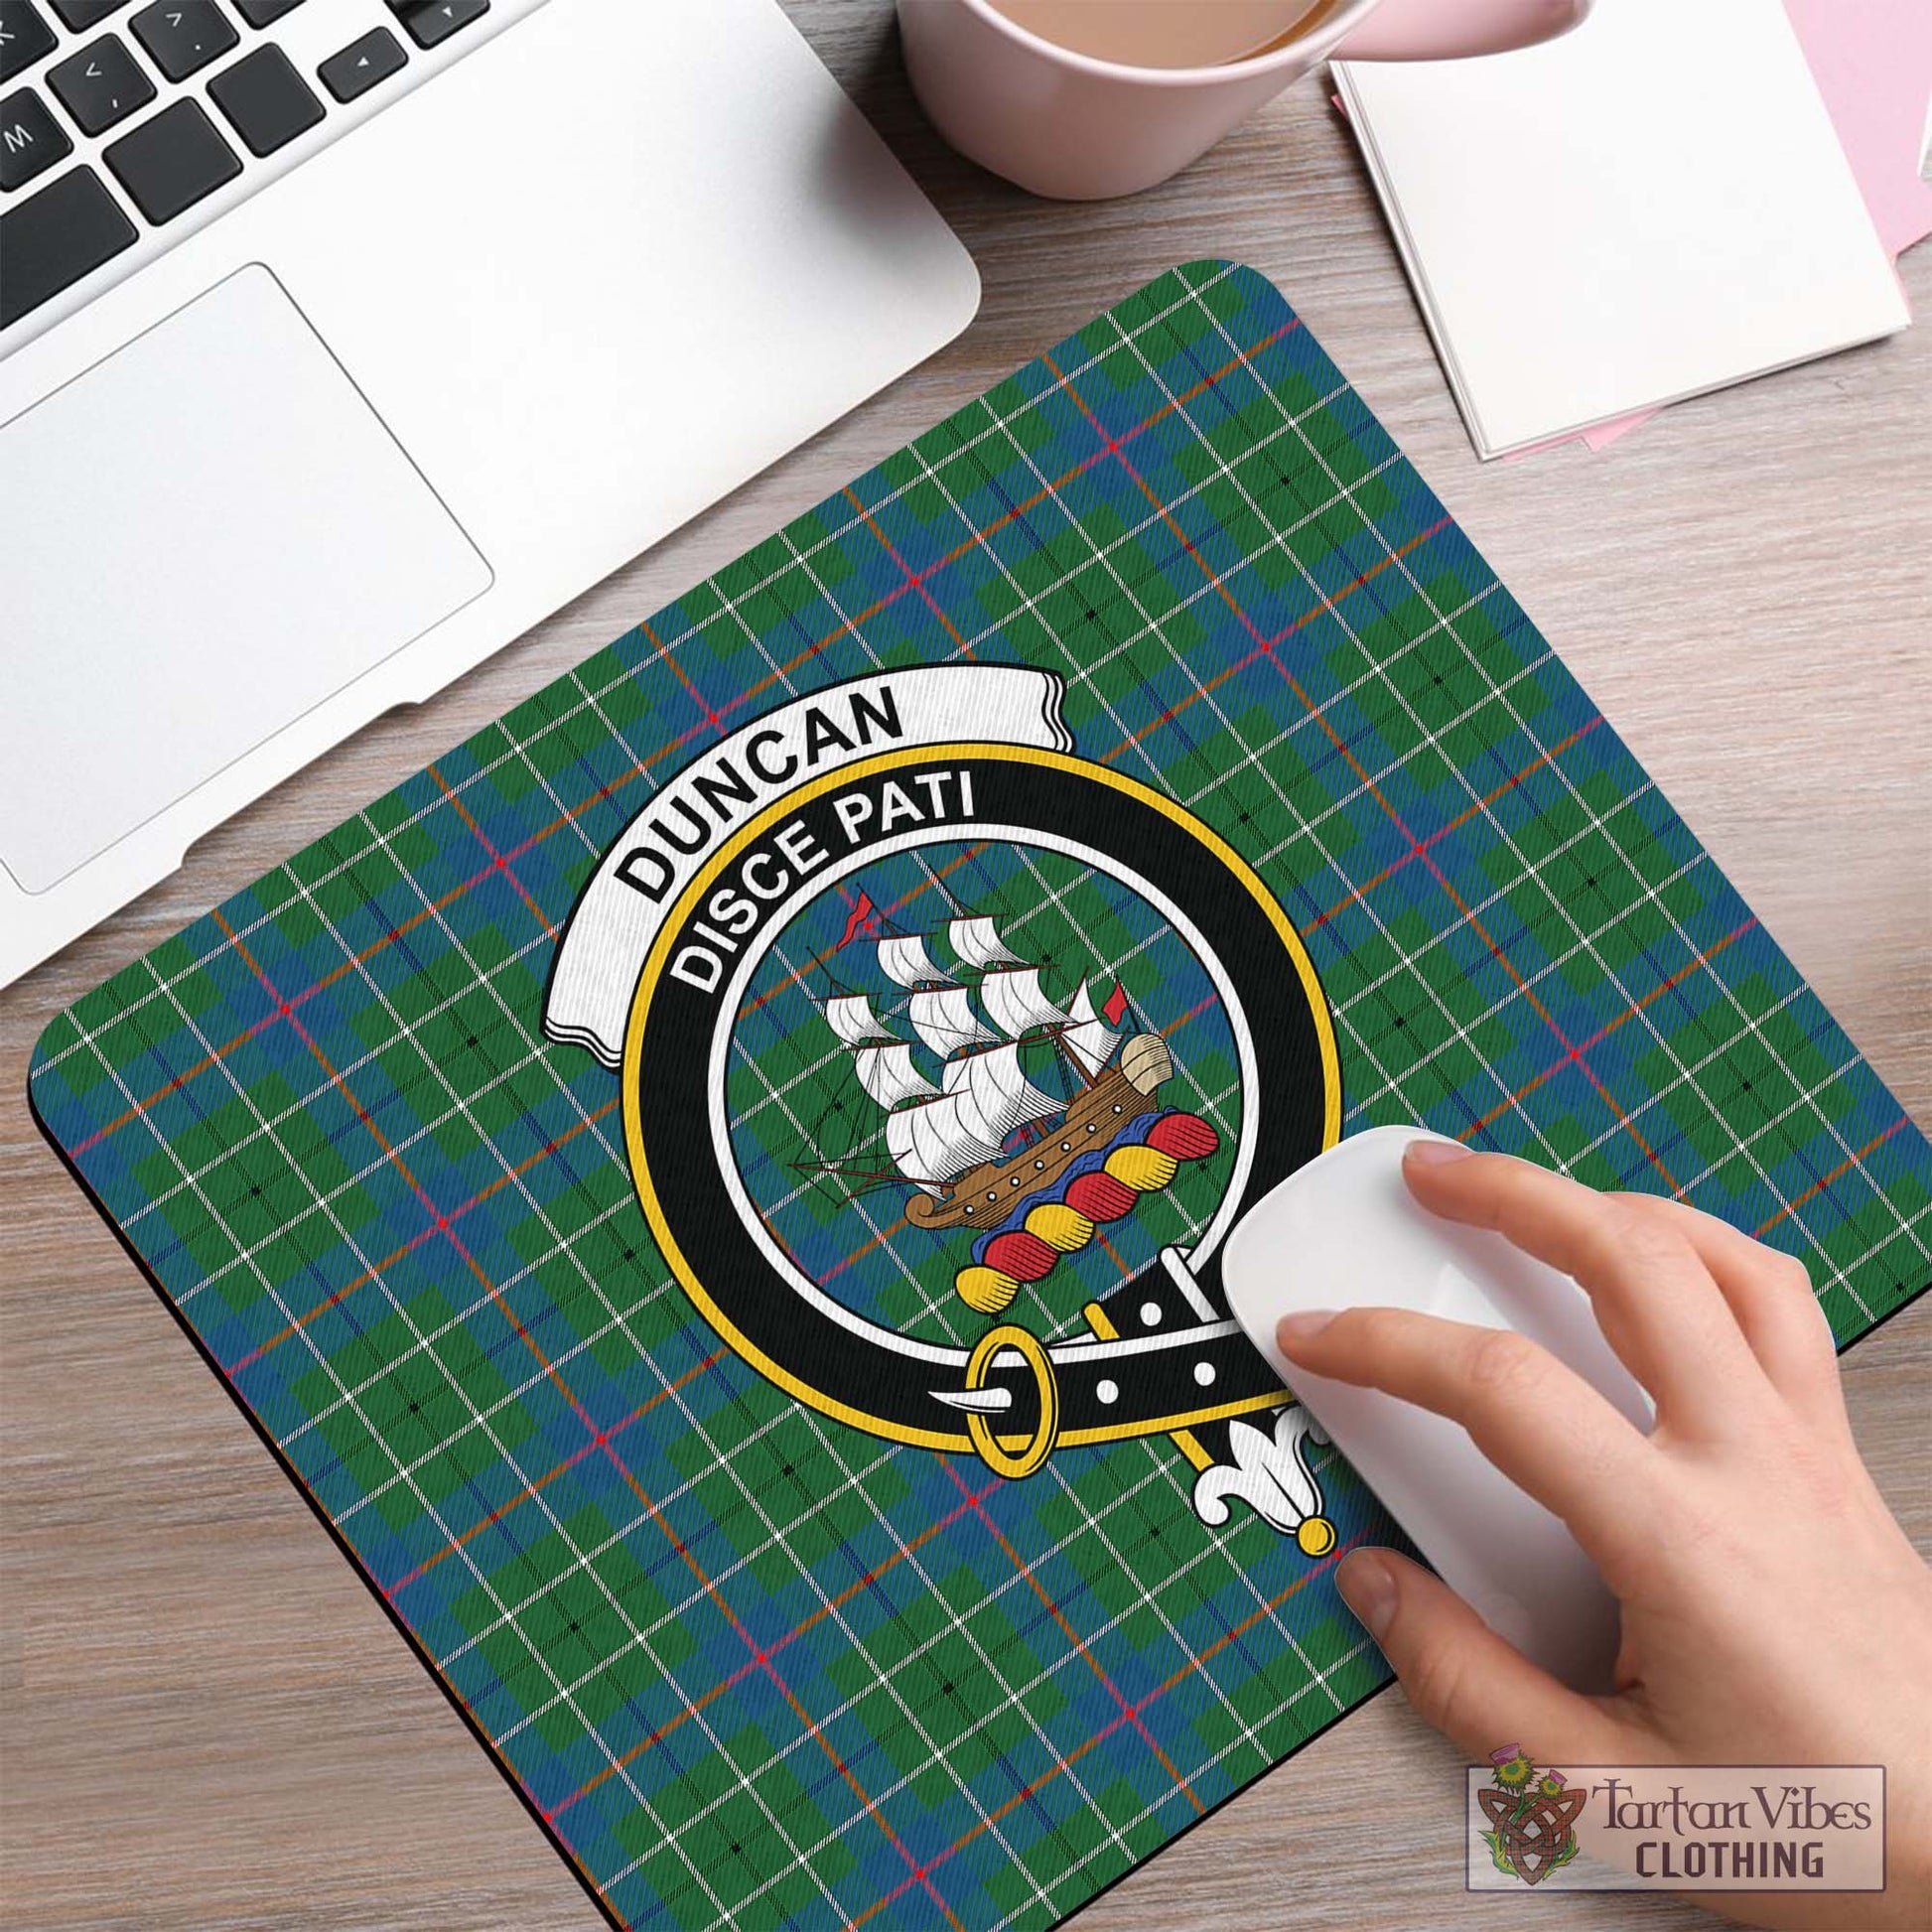 Tartan Vibes Clothing Duncan Ancient Tartan Mouse Pad with Family Crest